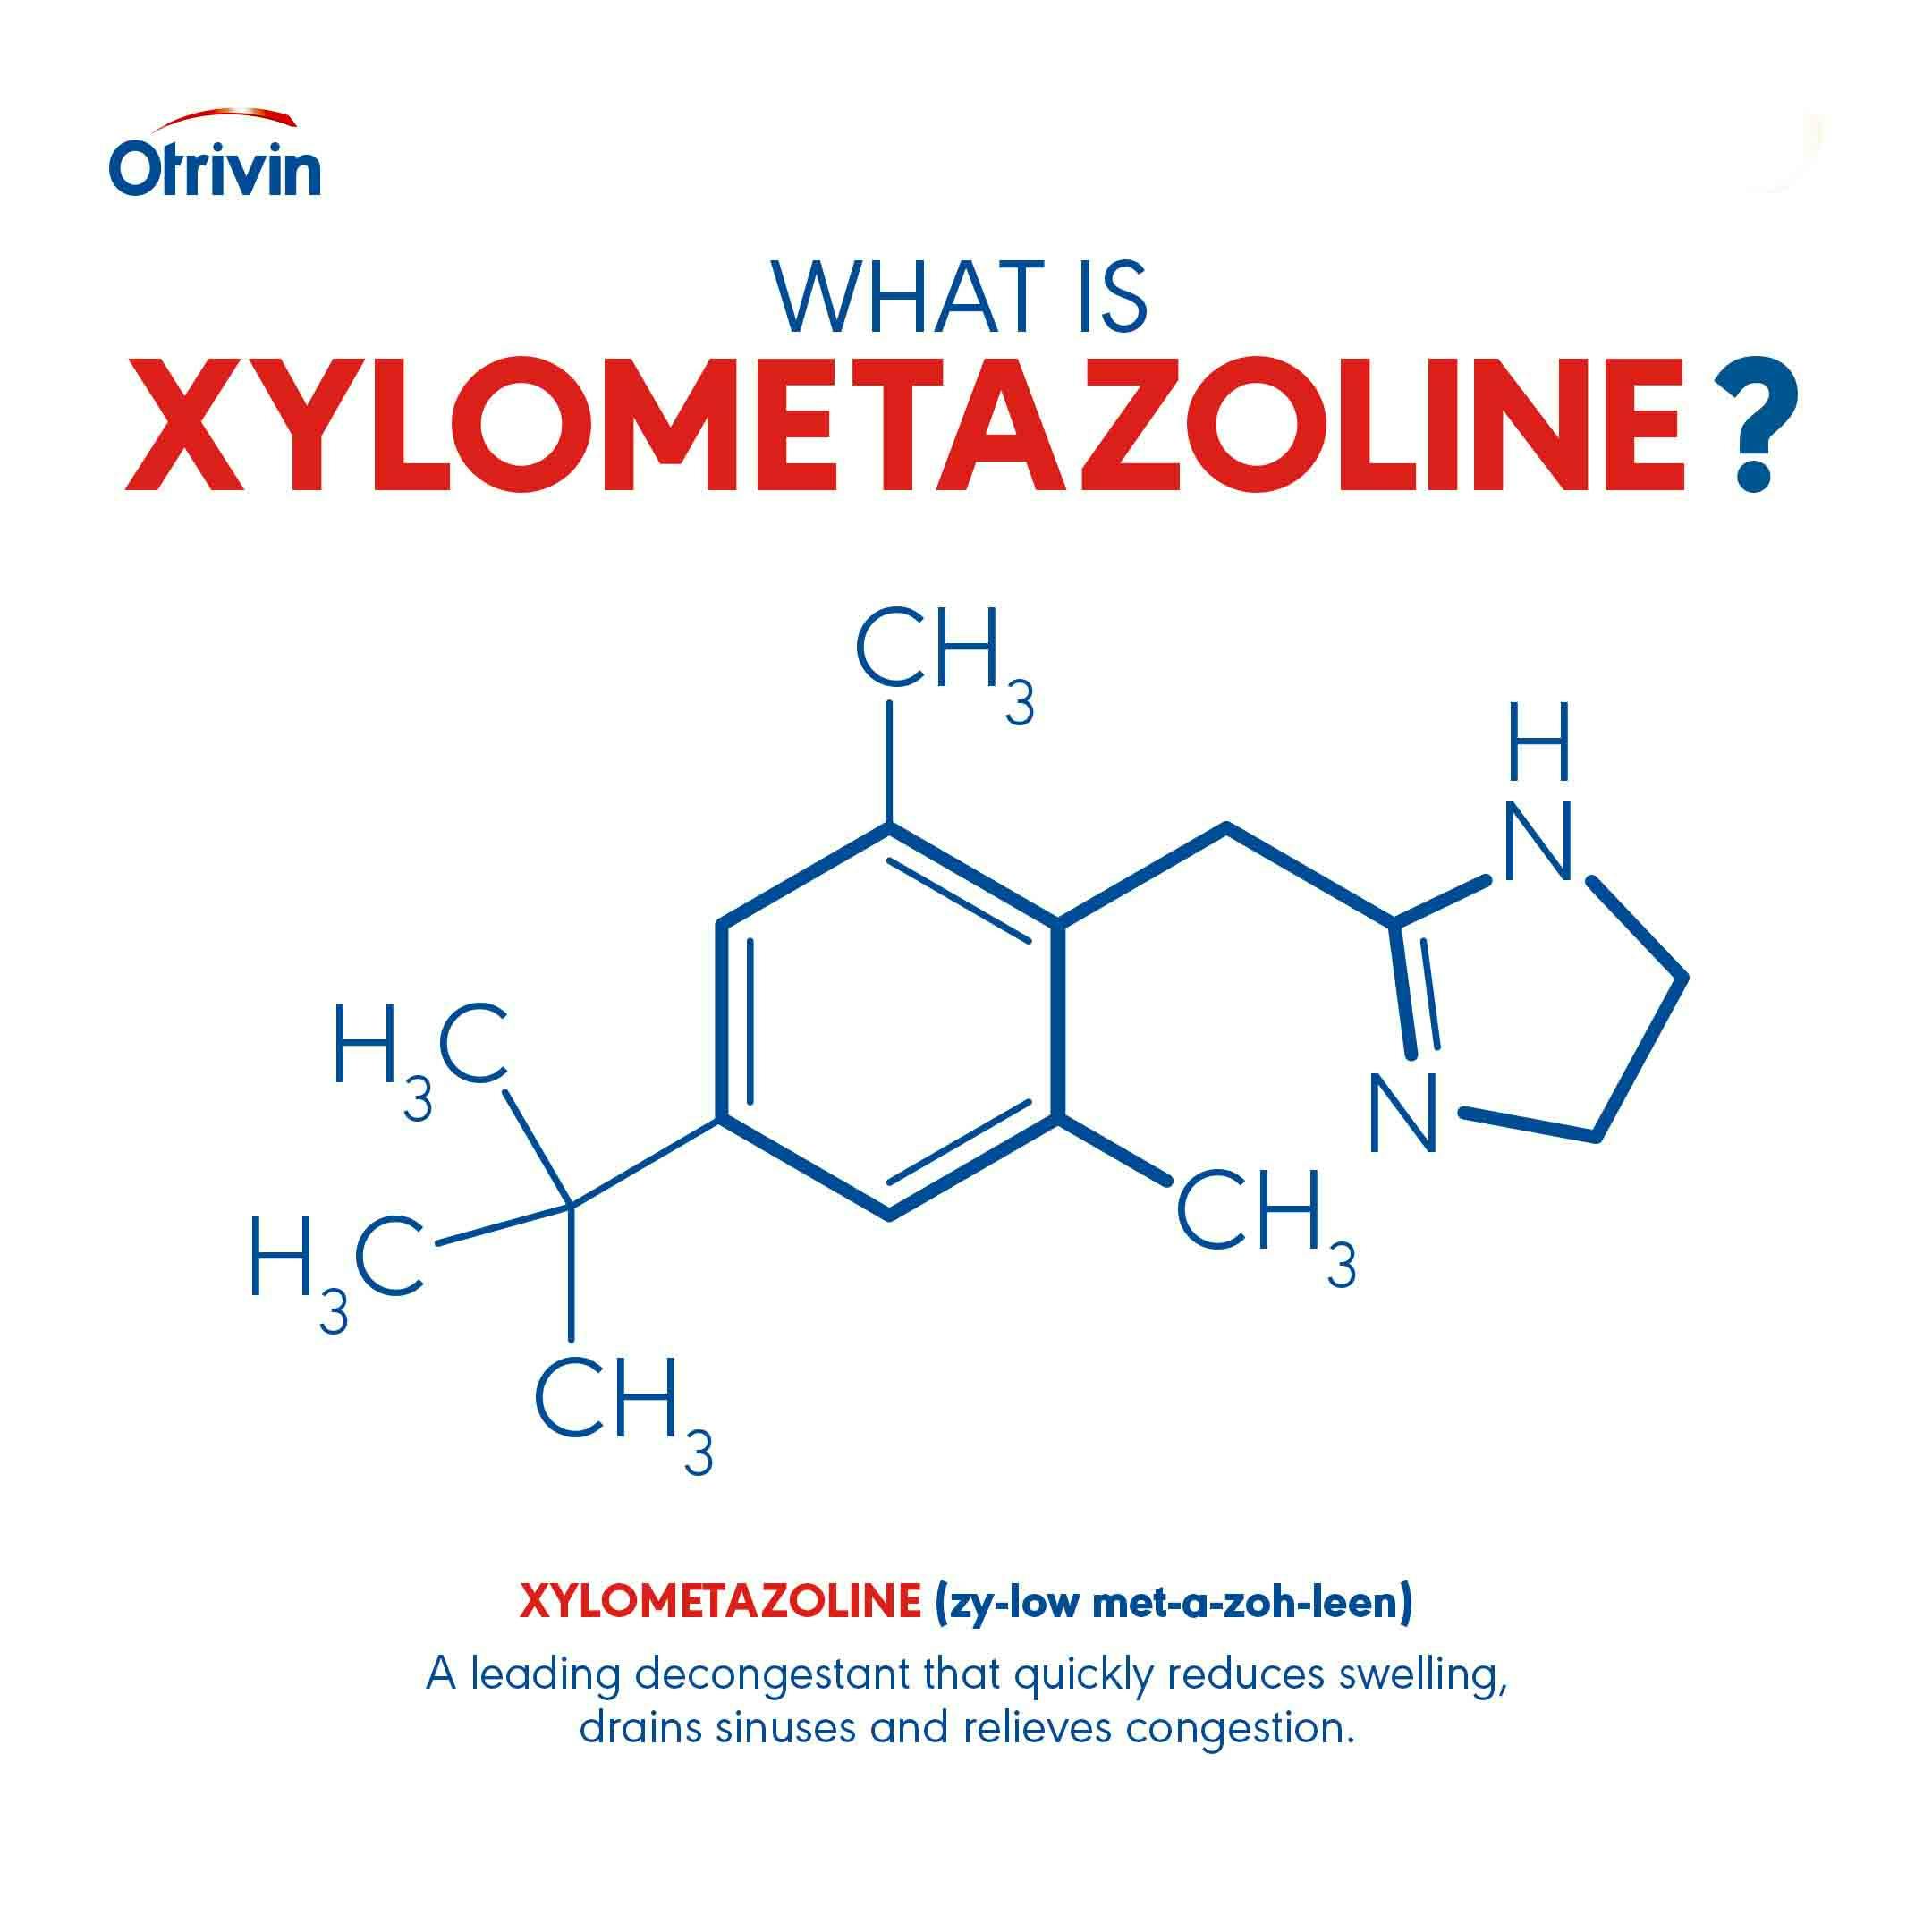 What is Xylometazoline